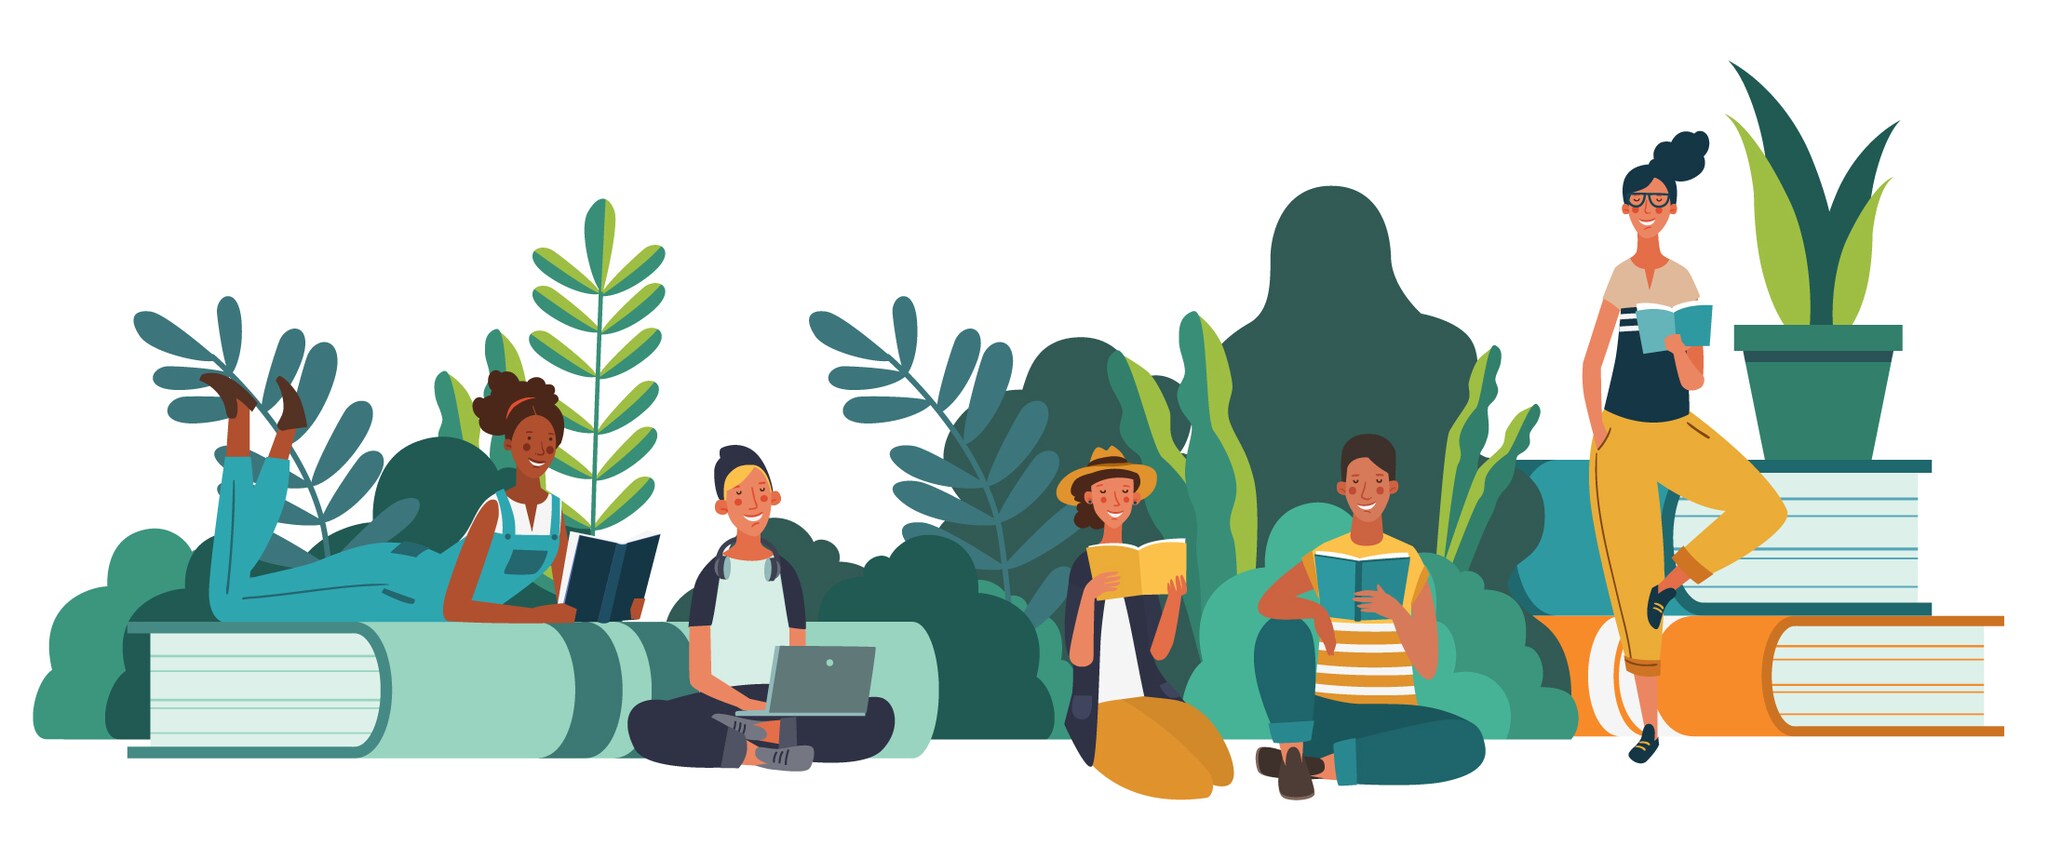 Illustration of teens reading surrounded by nature